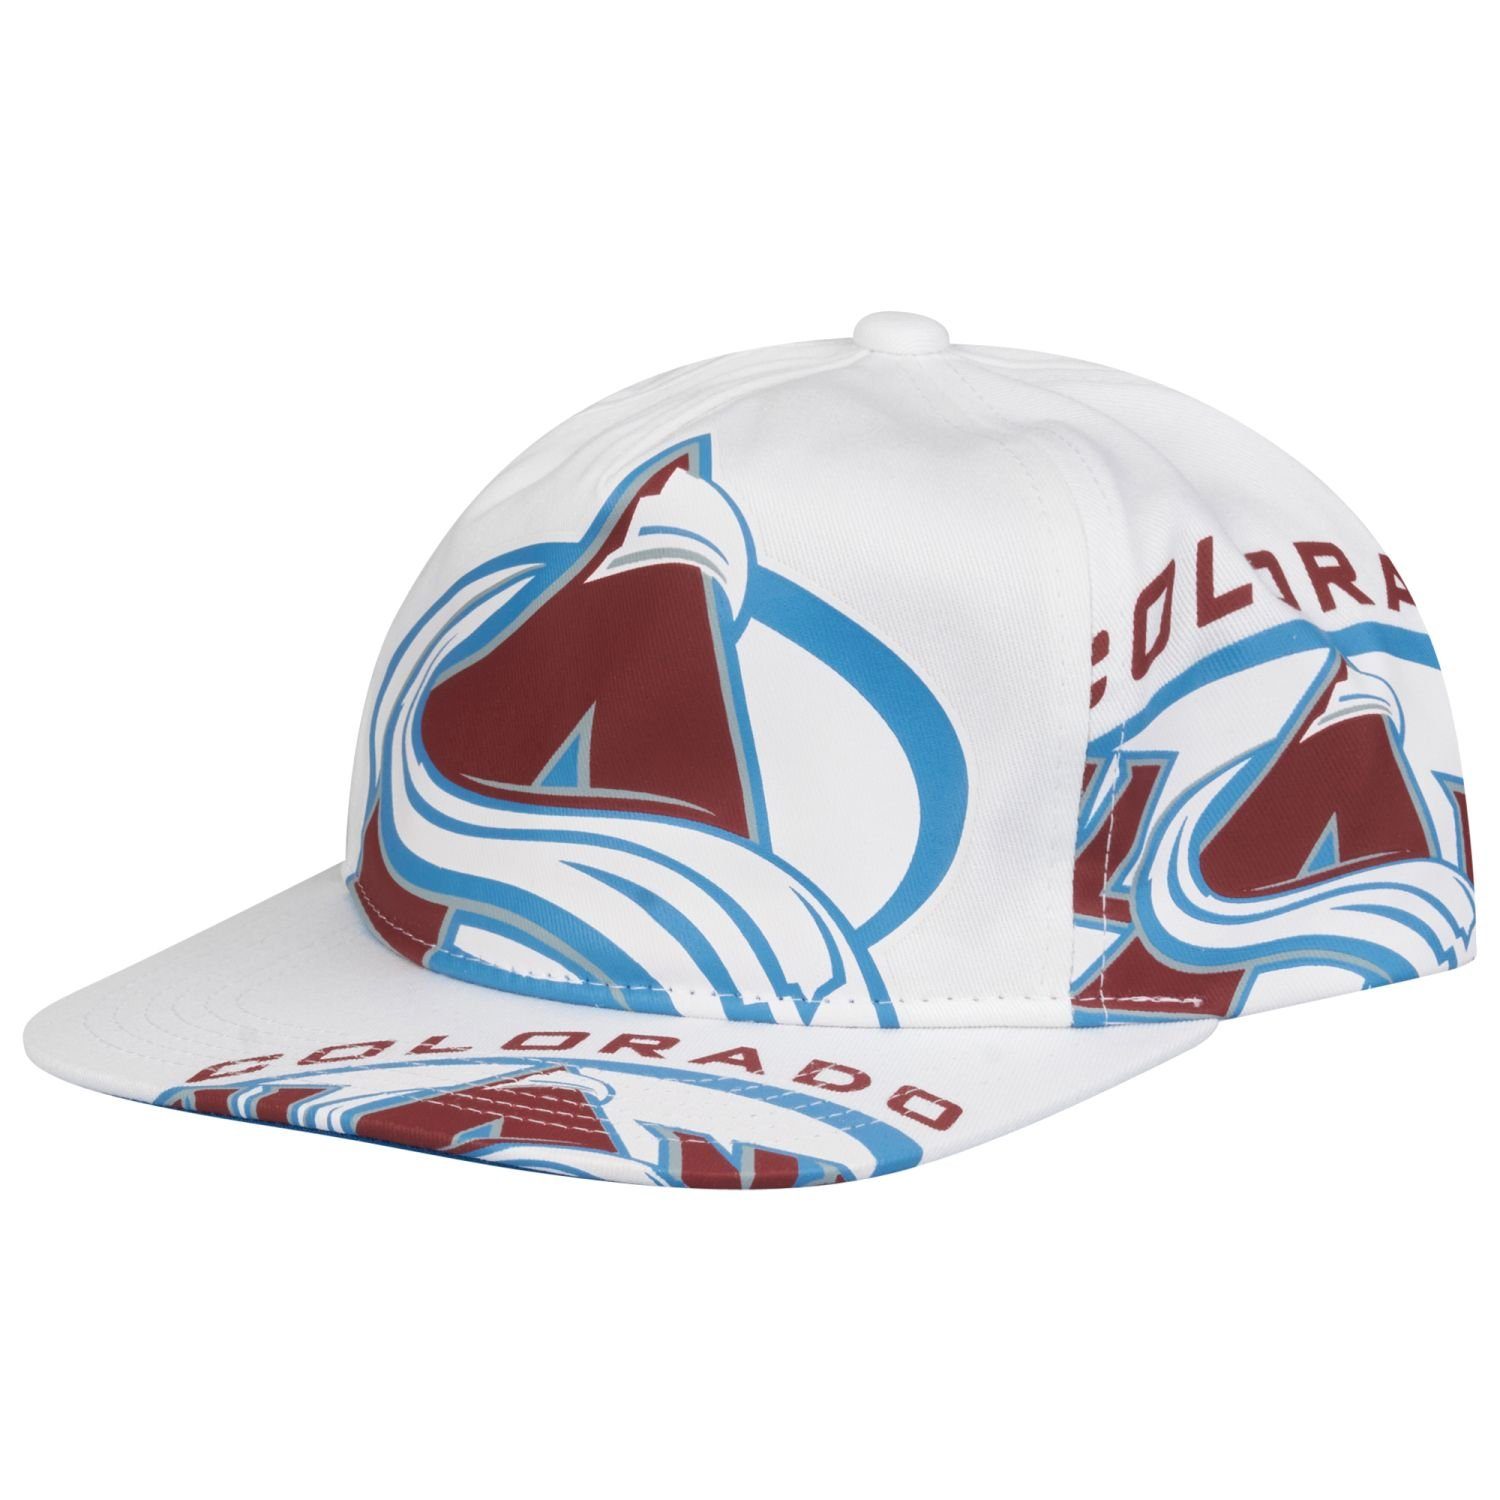 Mitchell & Ness Snapback Cap Unstructured DEADSTOCK Colorado Avalanche | Snapback Caps